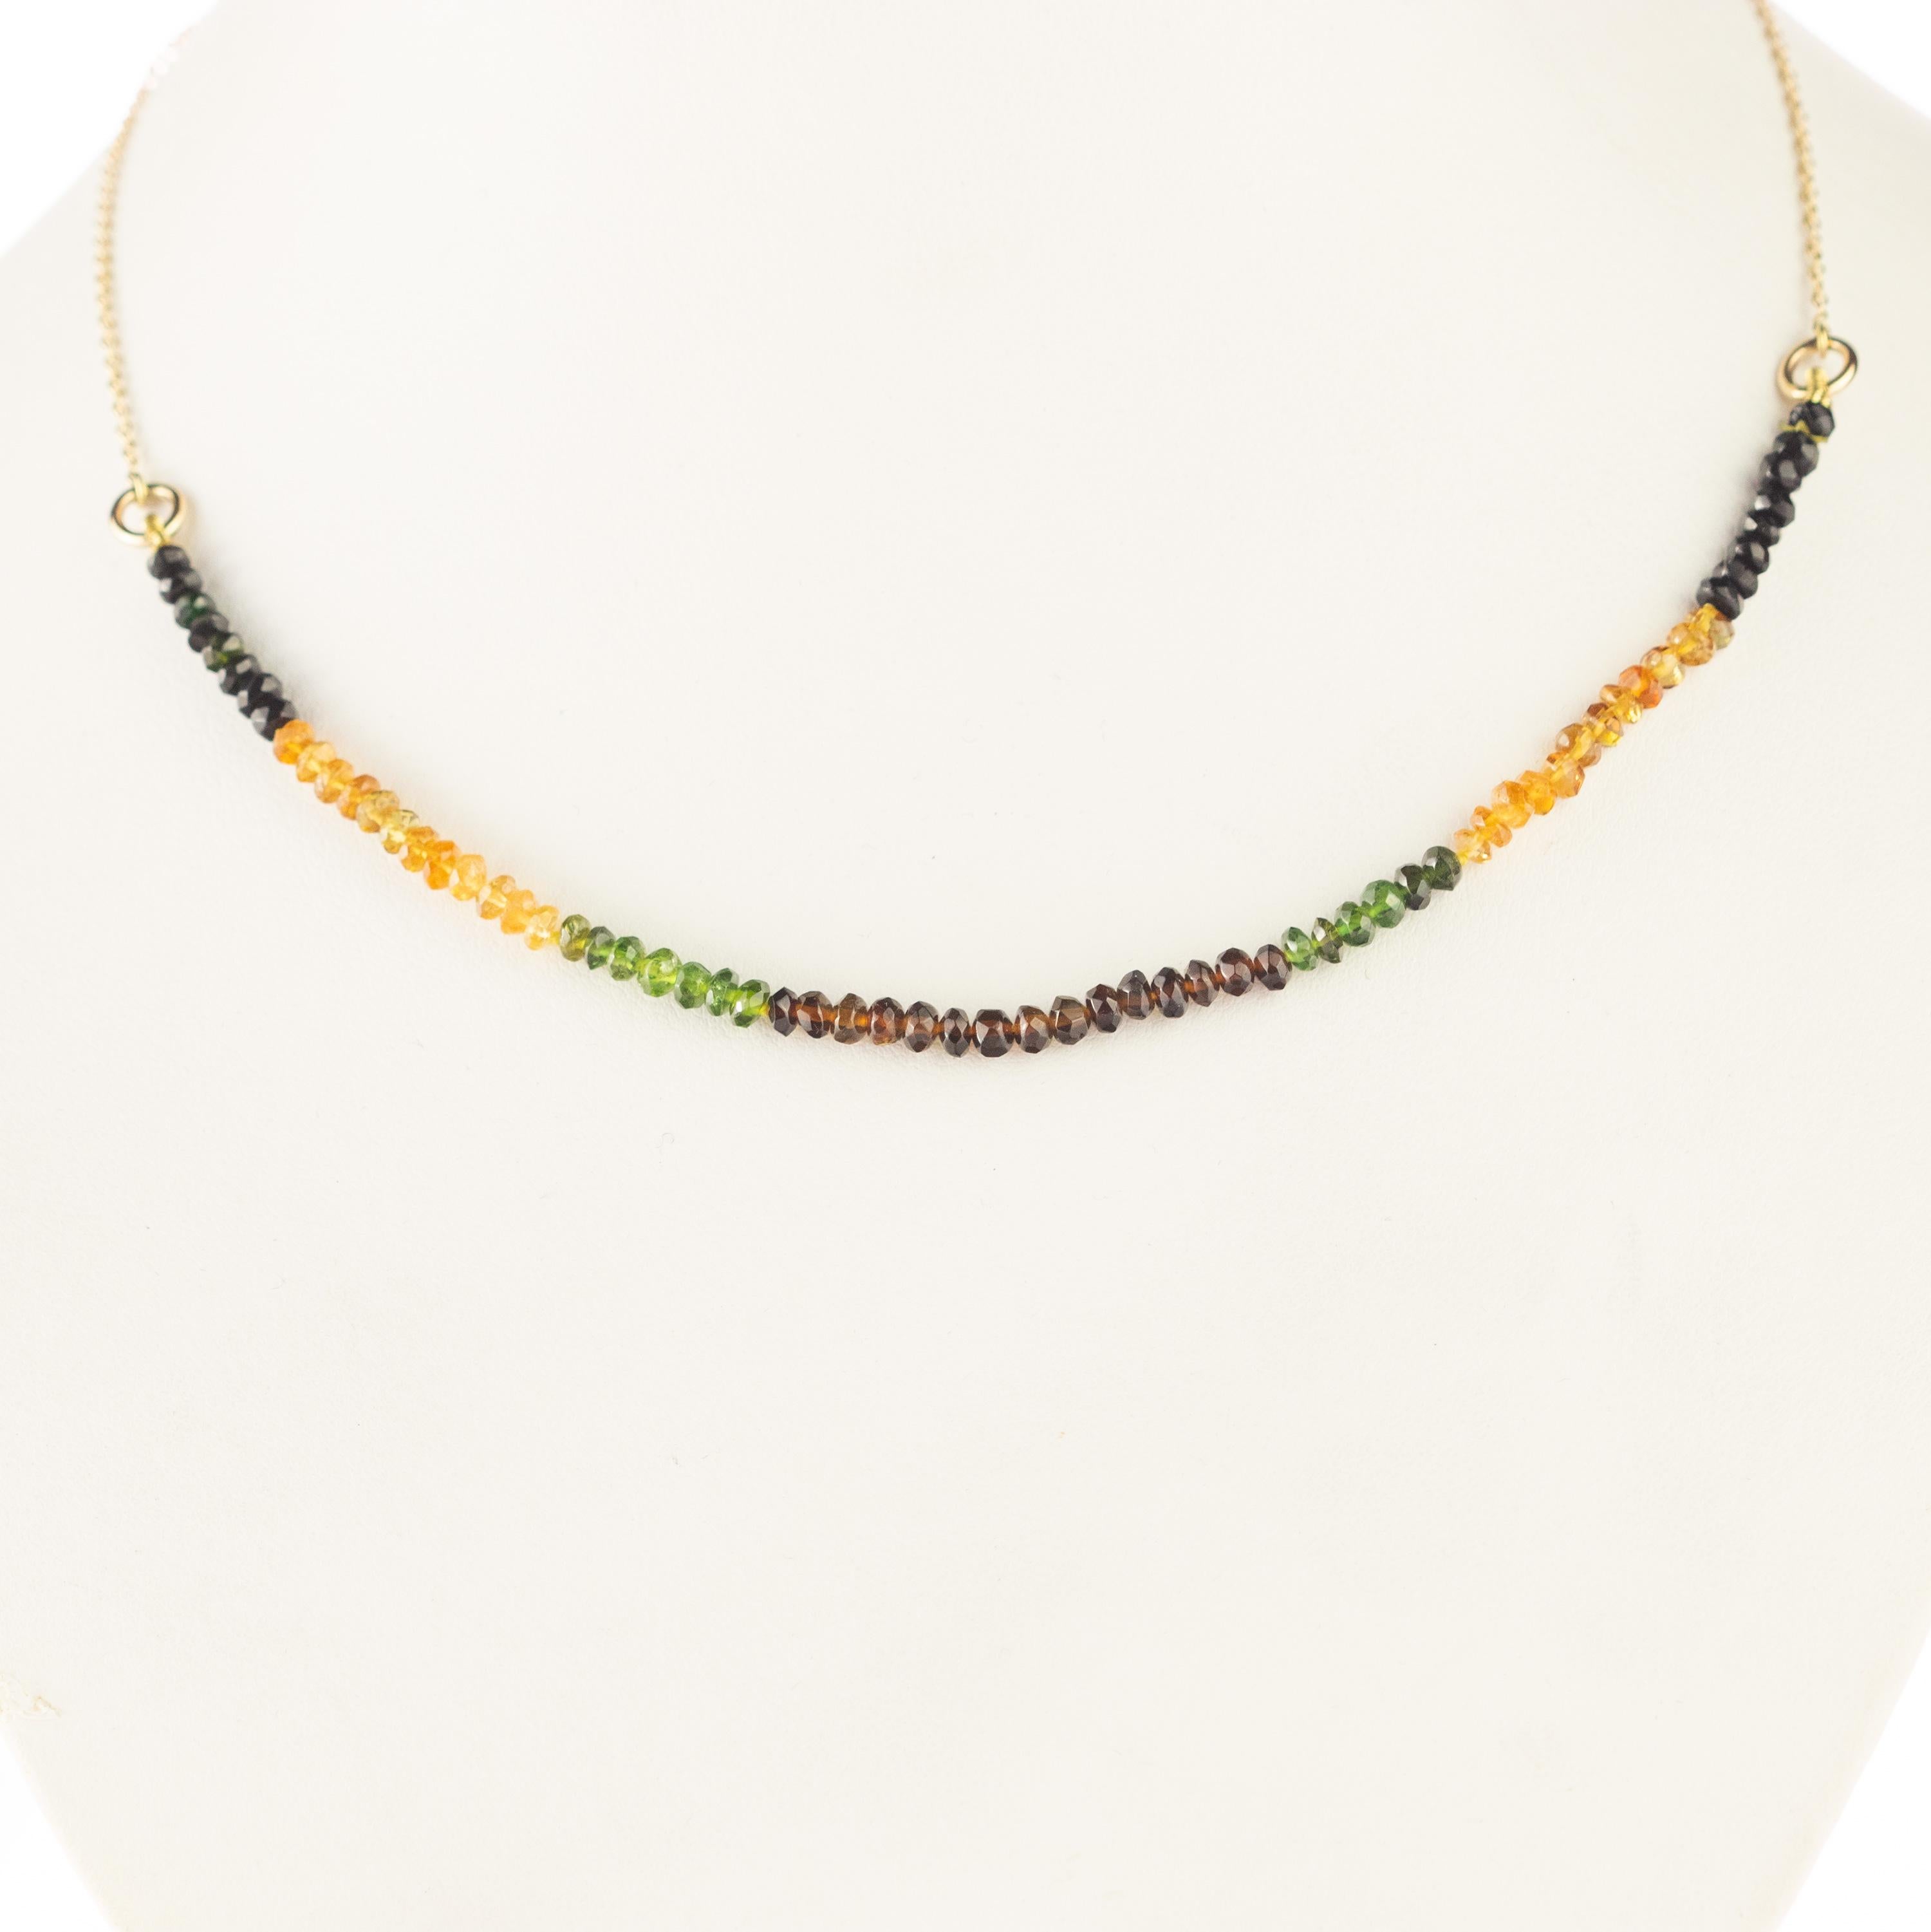 Women's or Men's Intini Jewels Gold Plate Chain Tourmaline Rondelles Cocktail Beaded Necklace For Sale